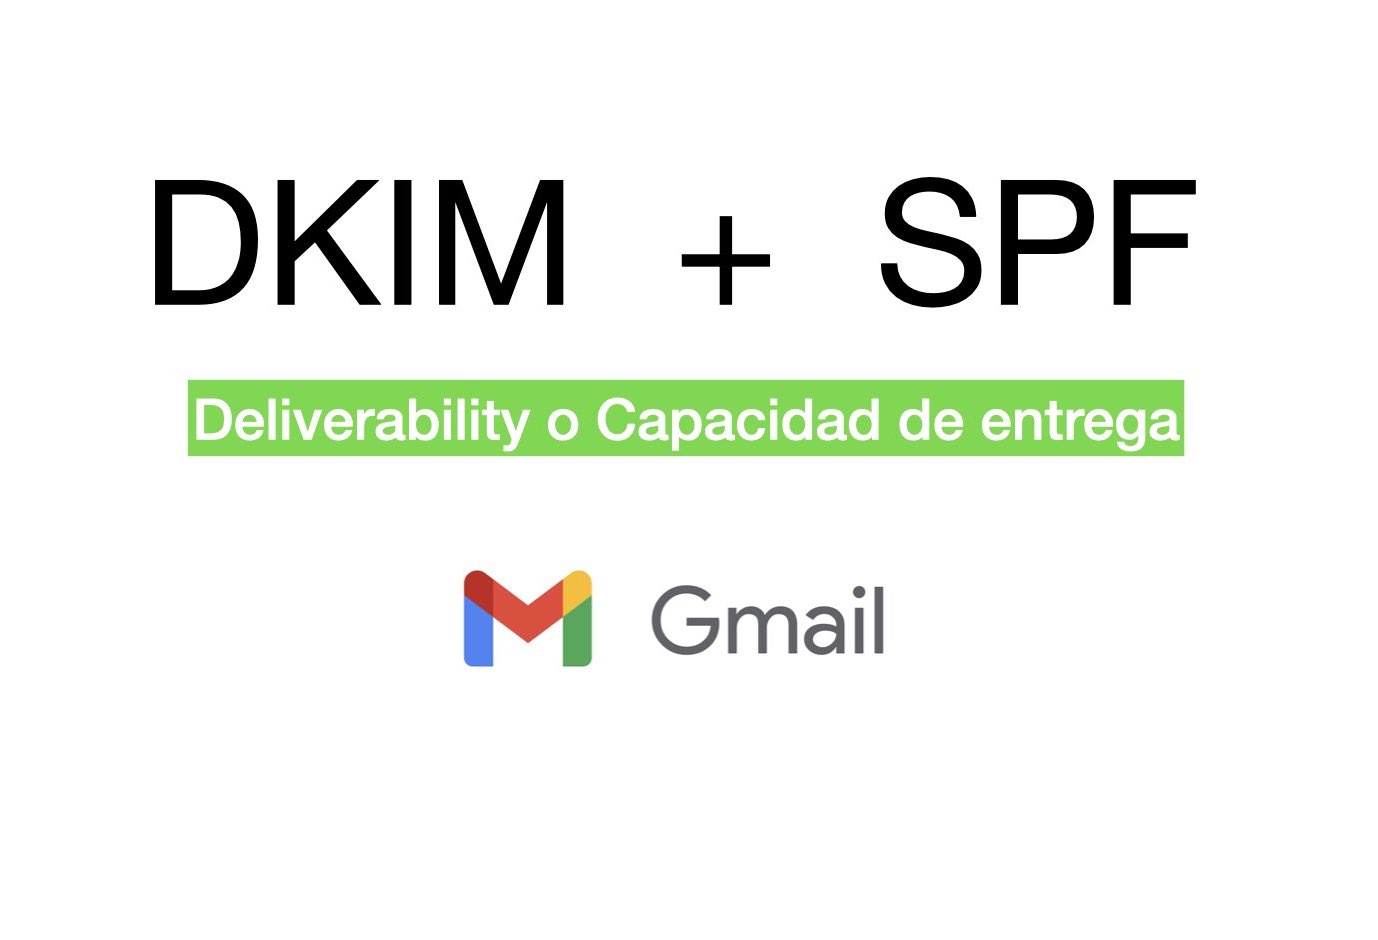 DKIM & SPF now achieve even better email deliverability when fully implemented, thanks to an unexpected catalyst 4